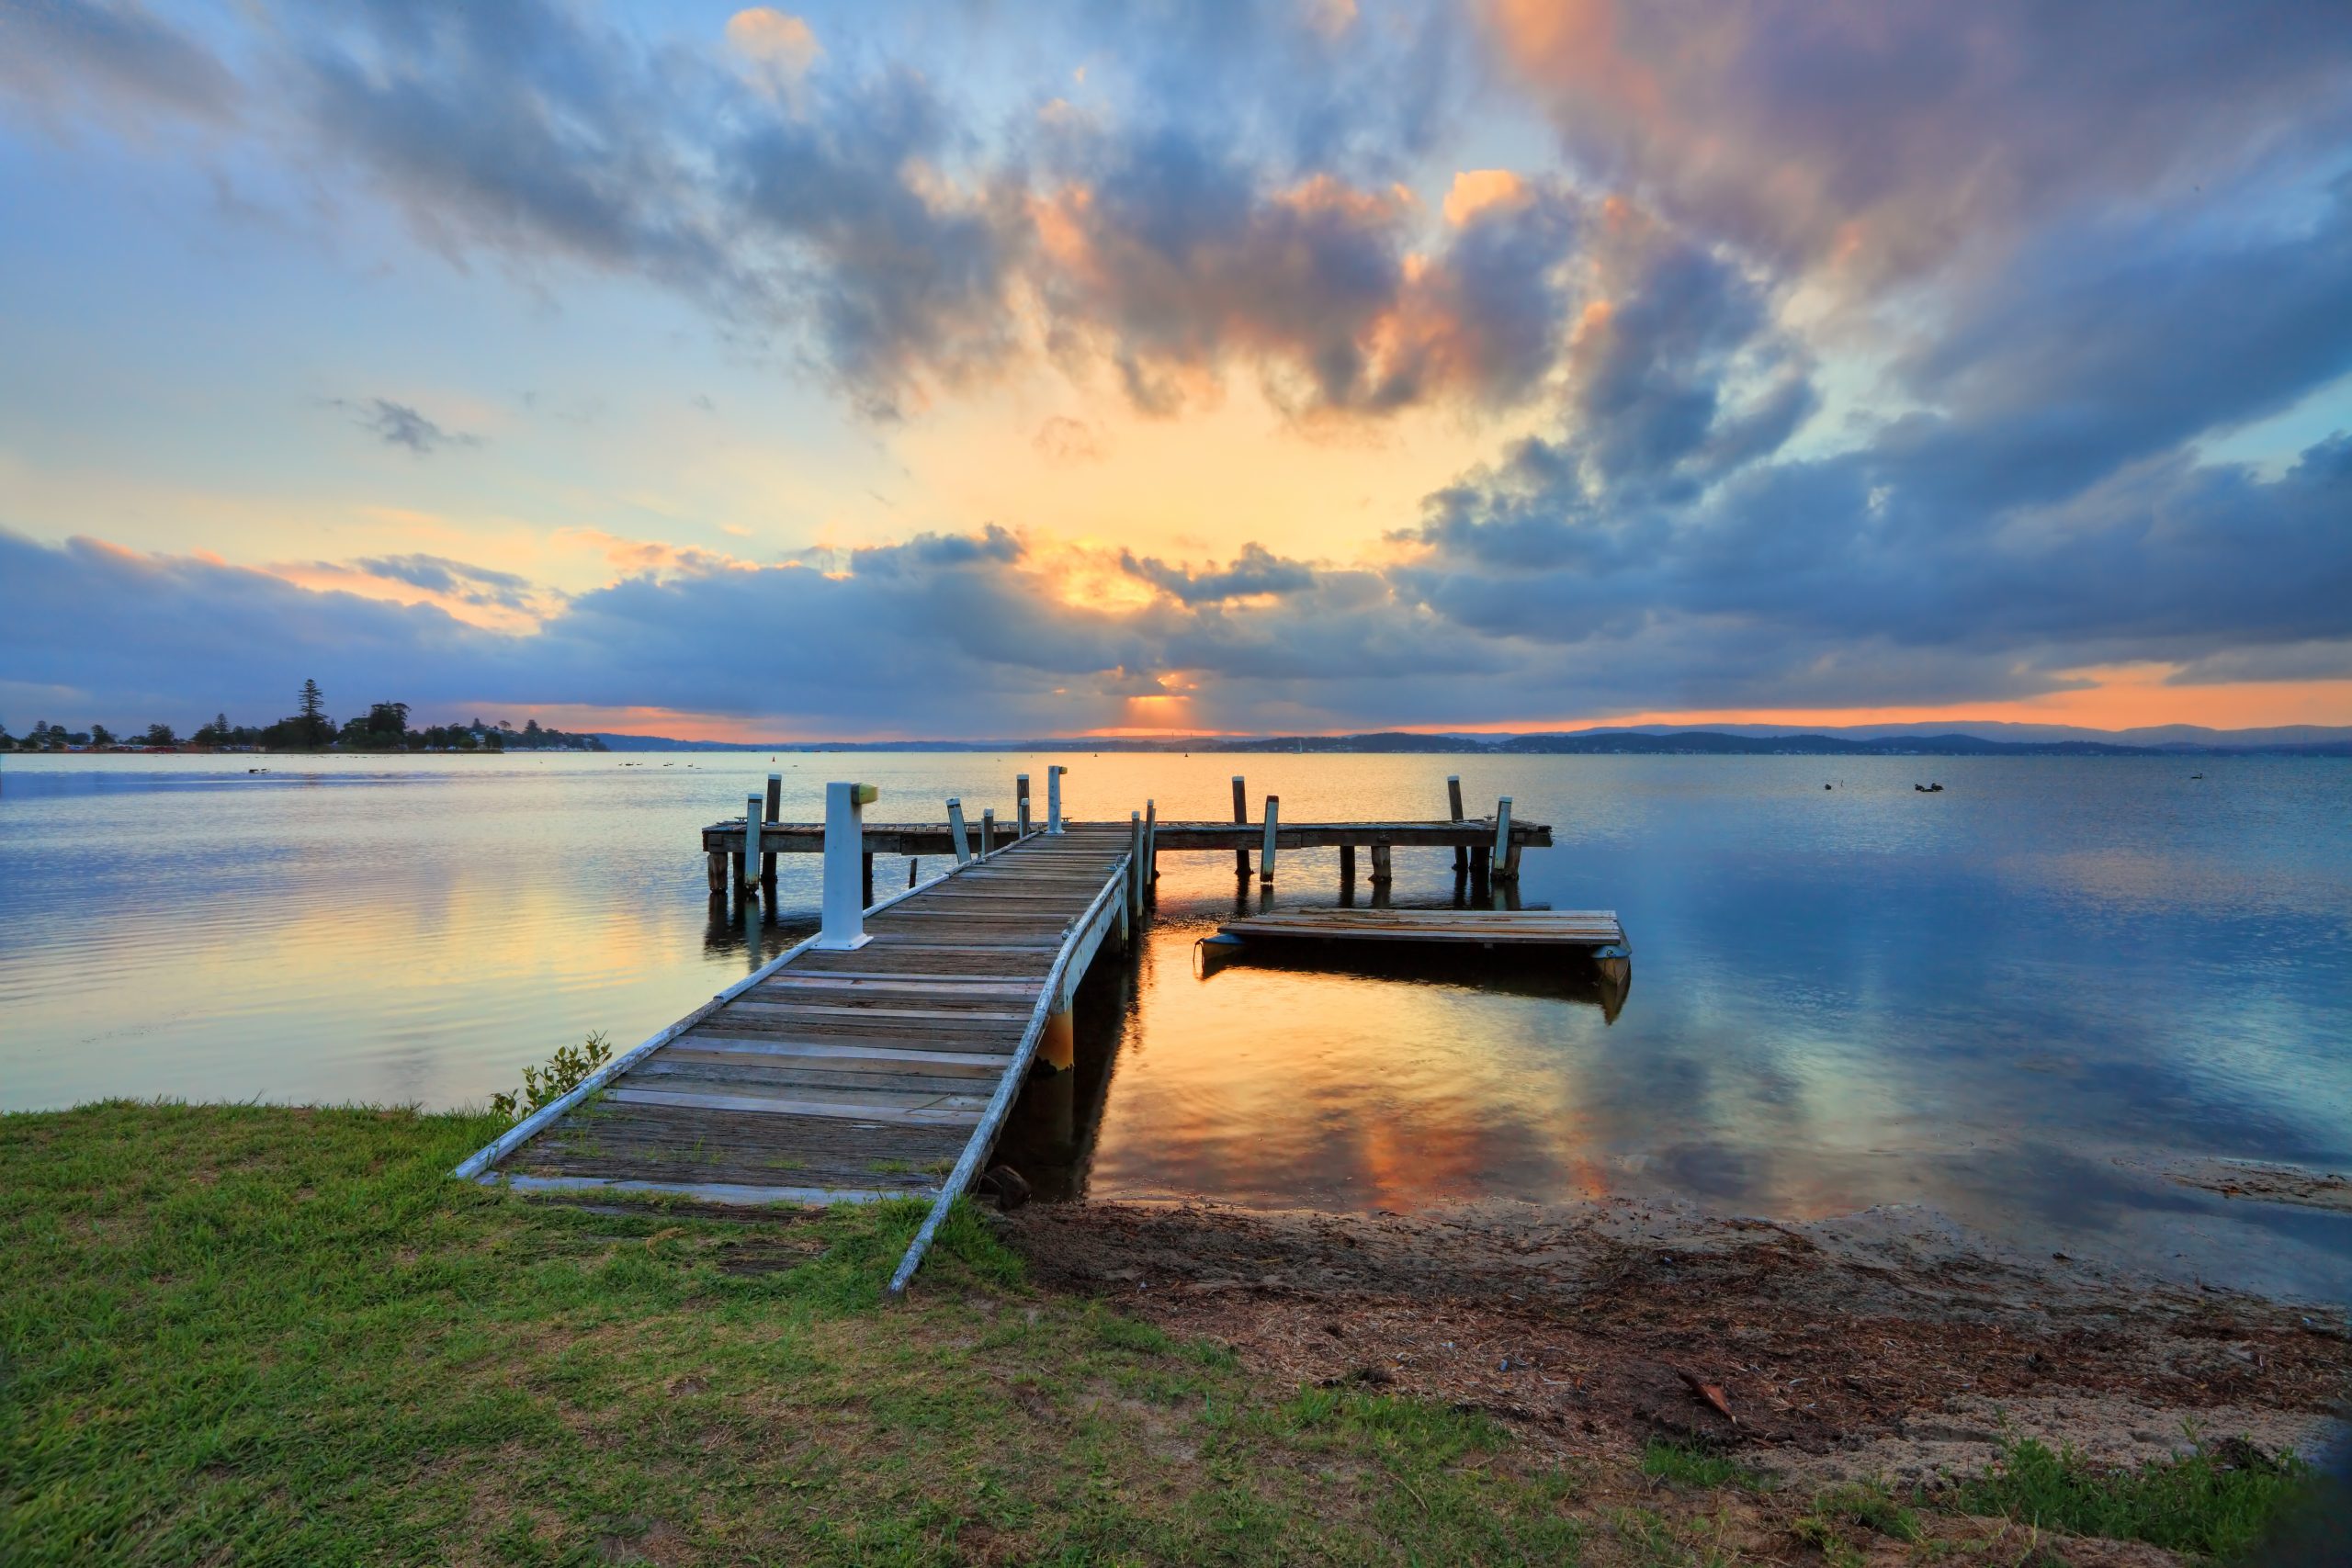 Sunset at Squids Ink Jetty, Belmont on Lake Macquarie in Australia.